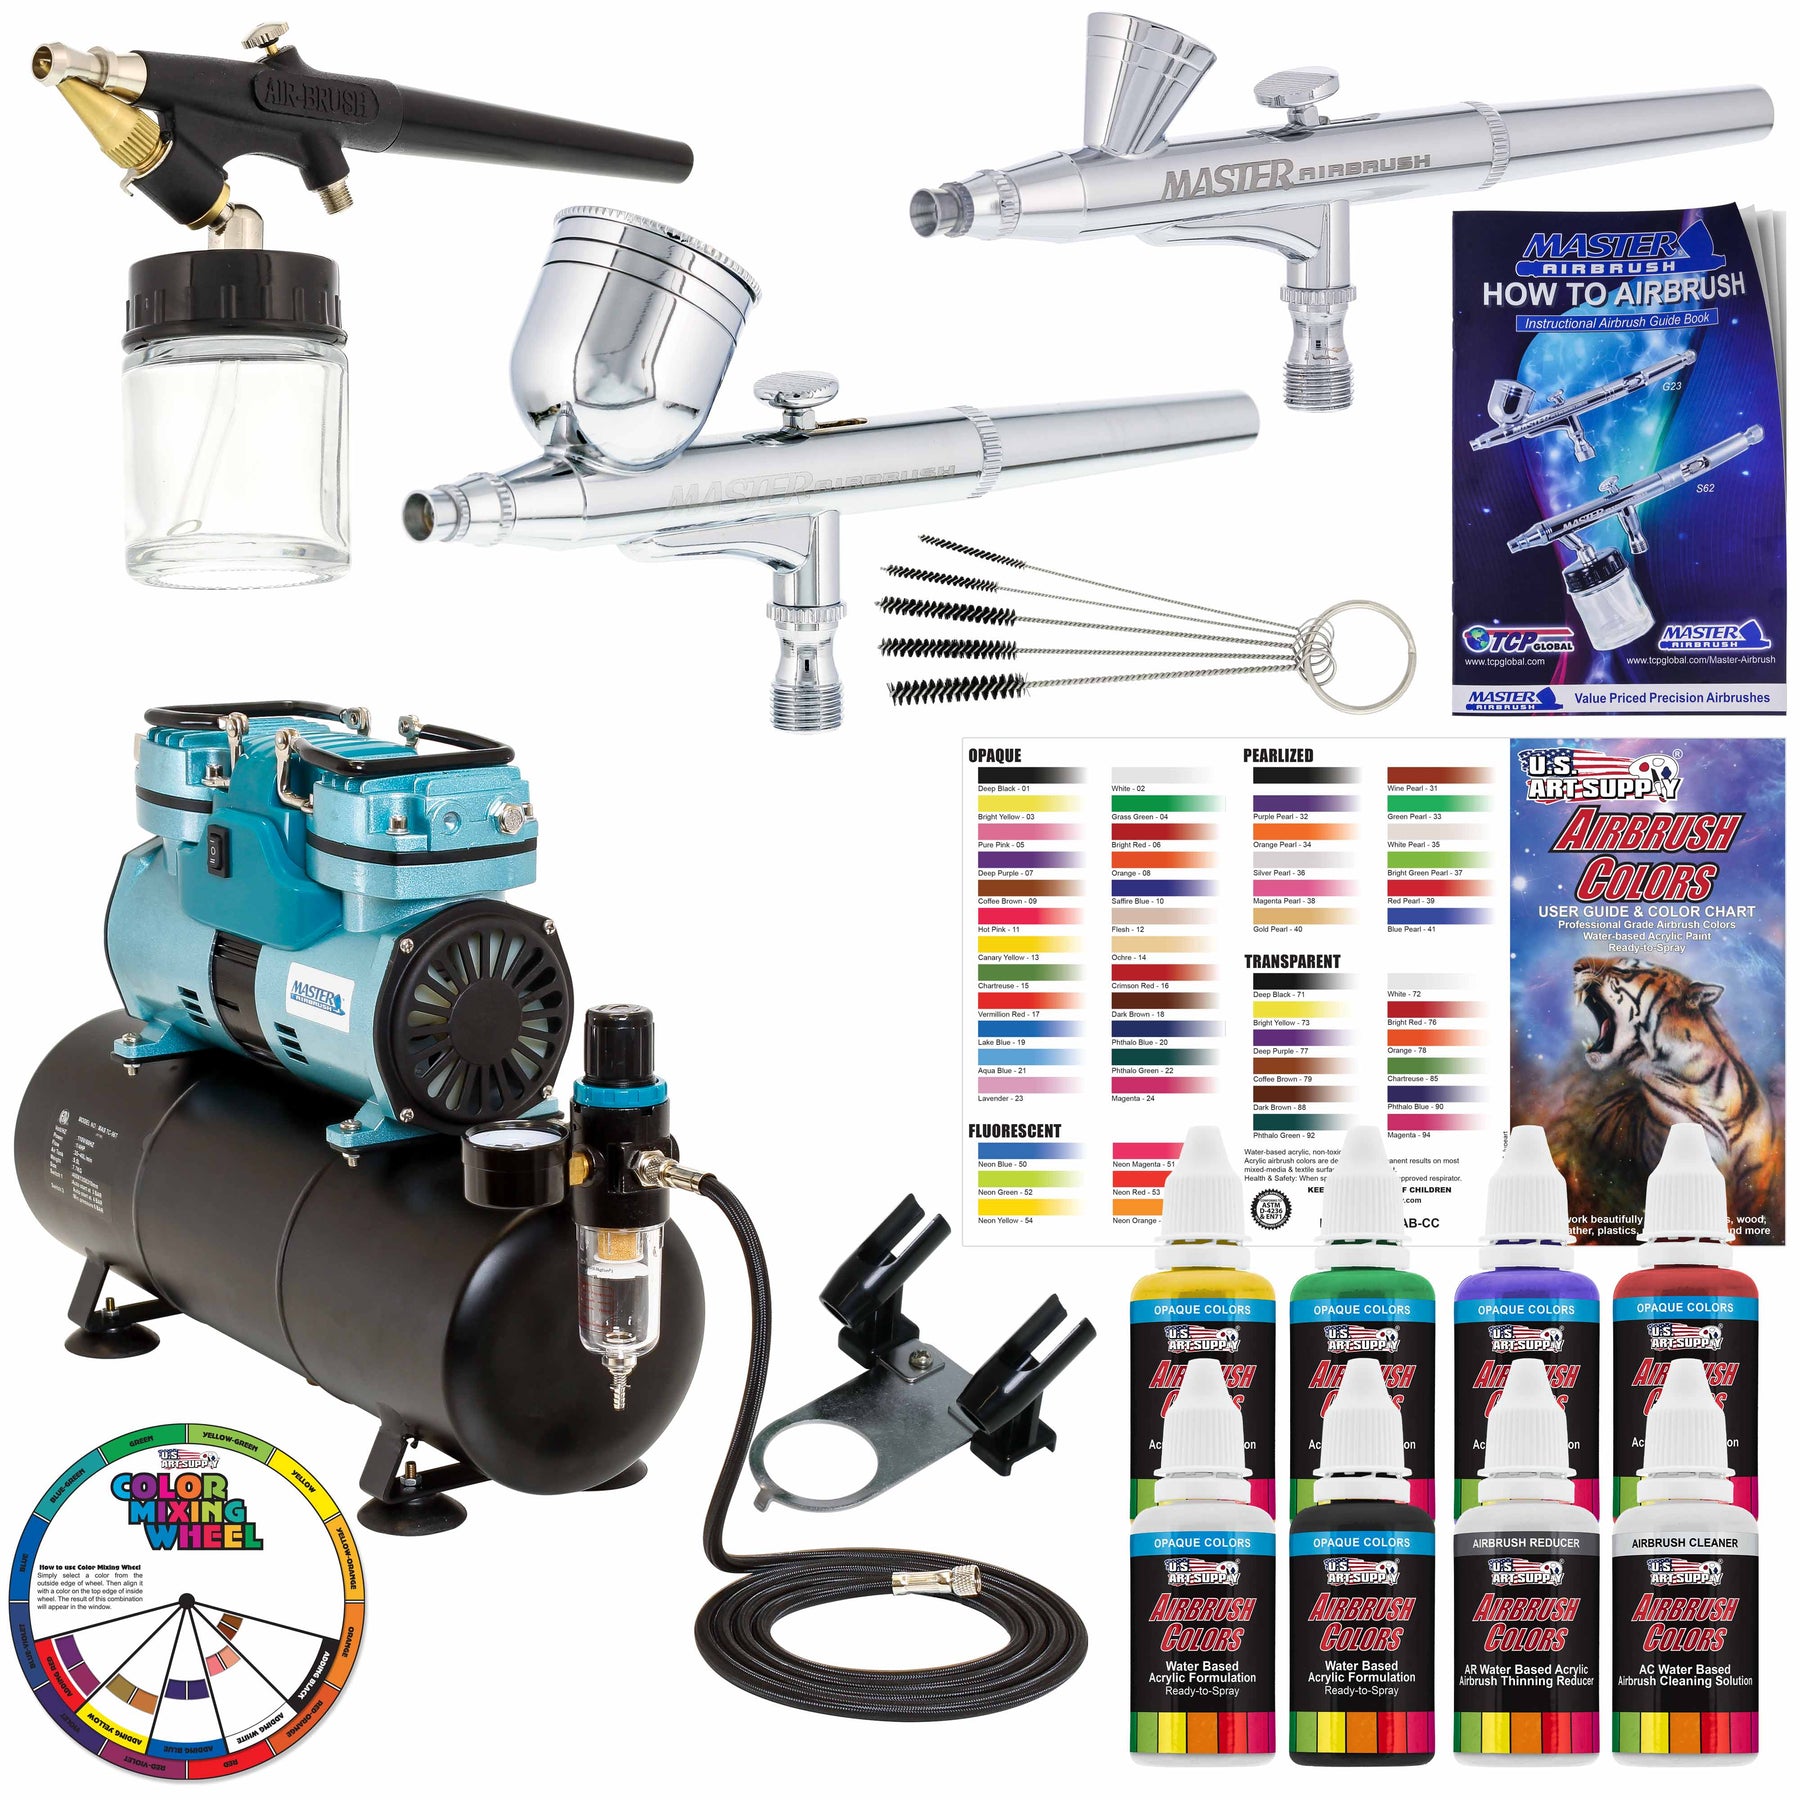 G25 Model Master Airbrush Precision Dual Action Gravity Feed New